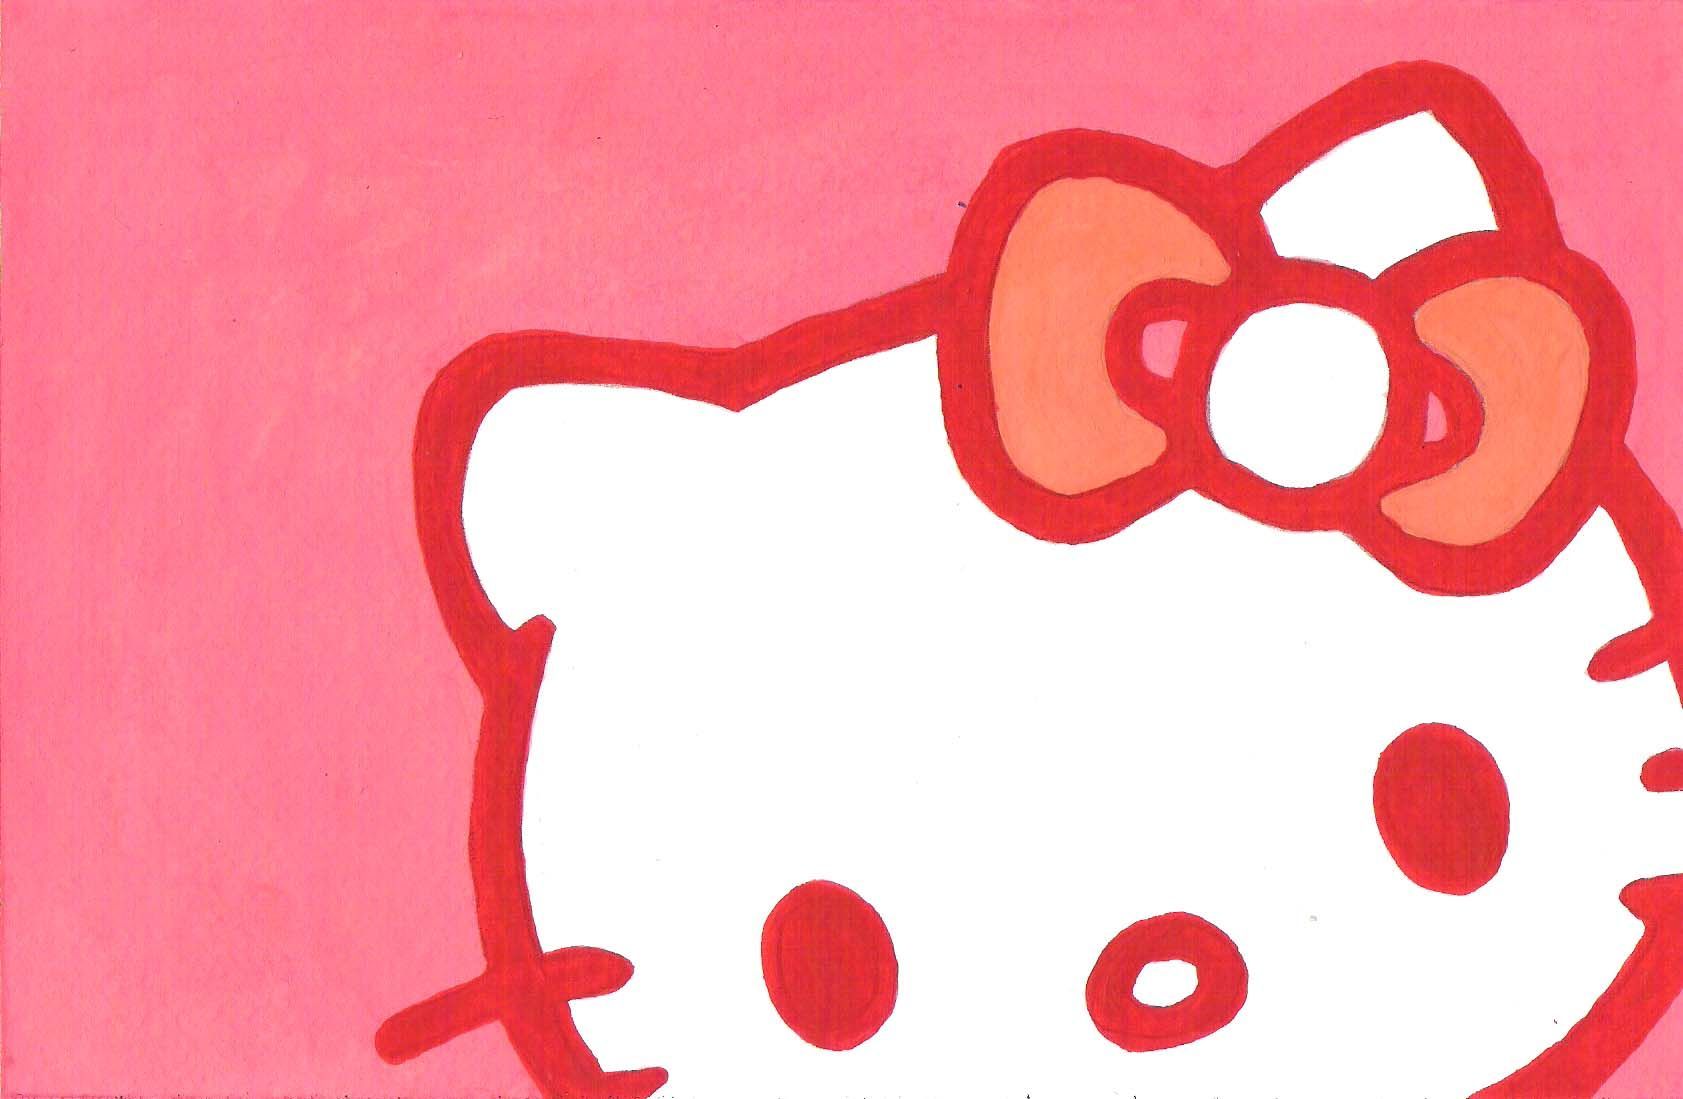 Download Cute Hello Kitty Wallpaper 1683x1099 Full HD Backgrounds